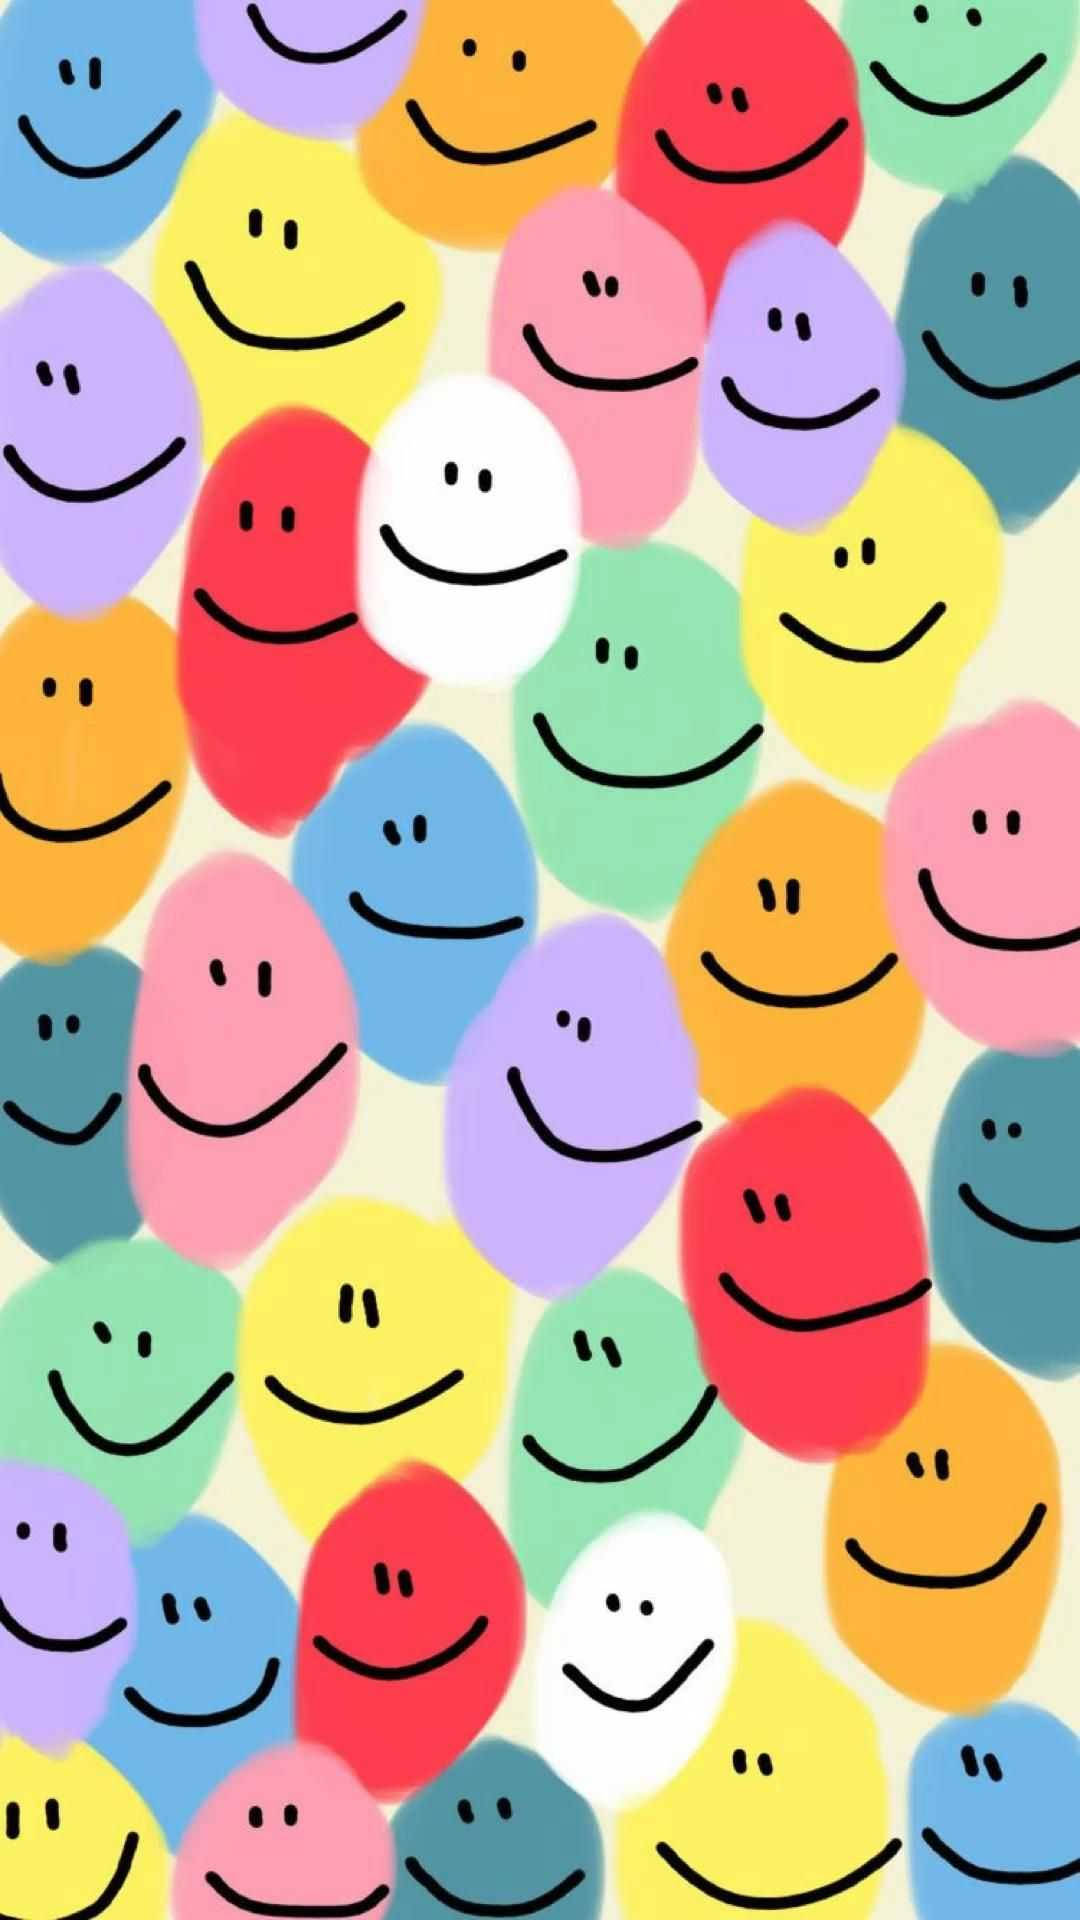 Joy Embodied In Colorful Smiley Doodle Art Background